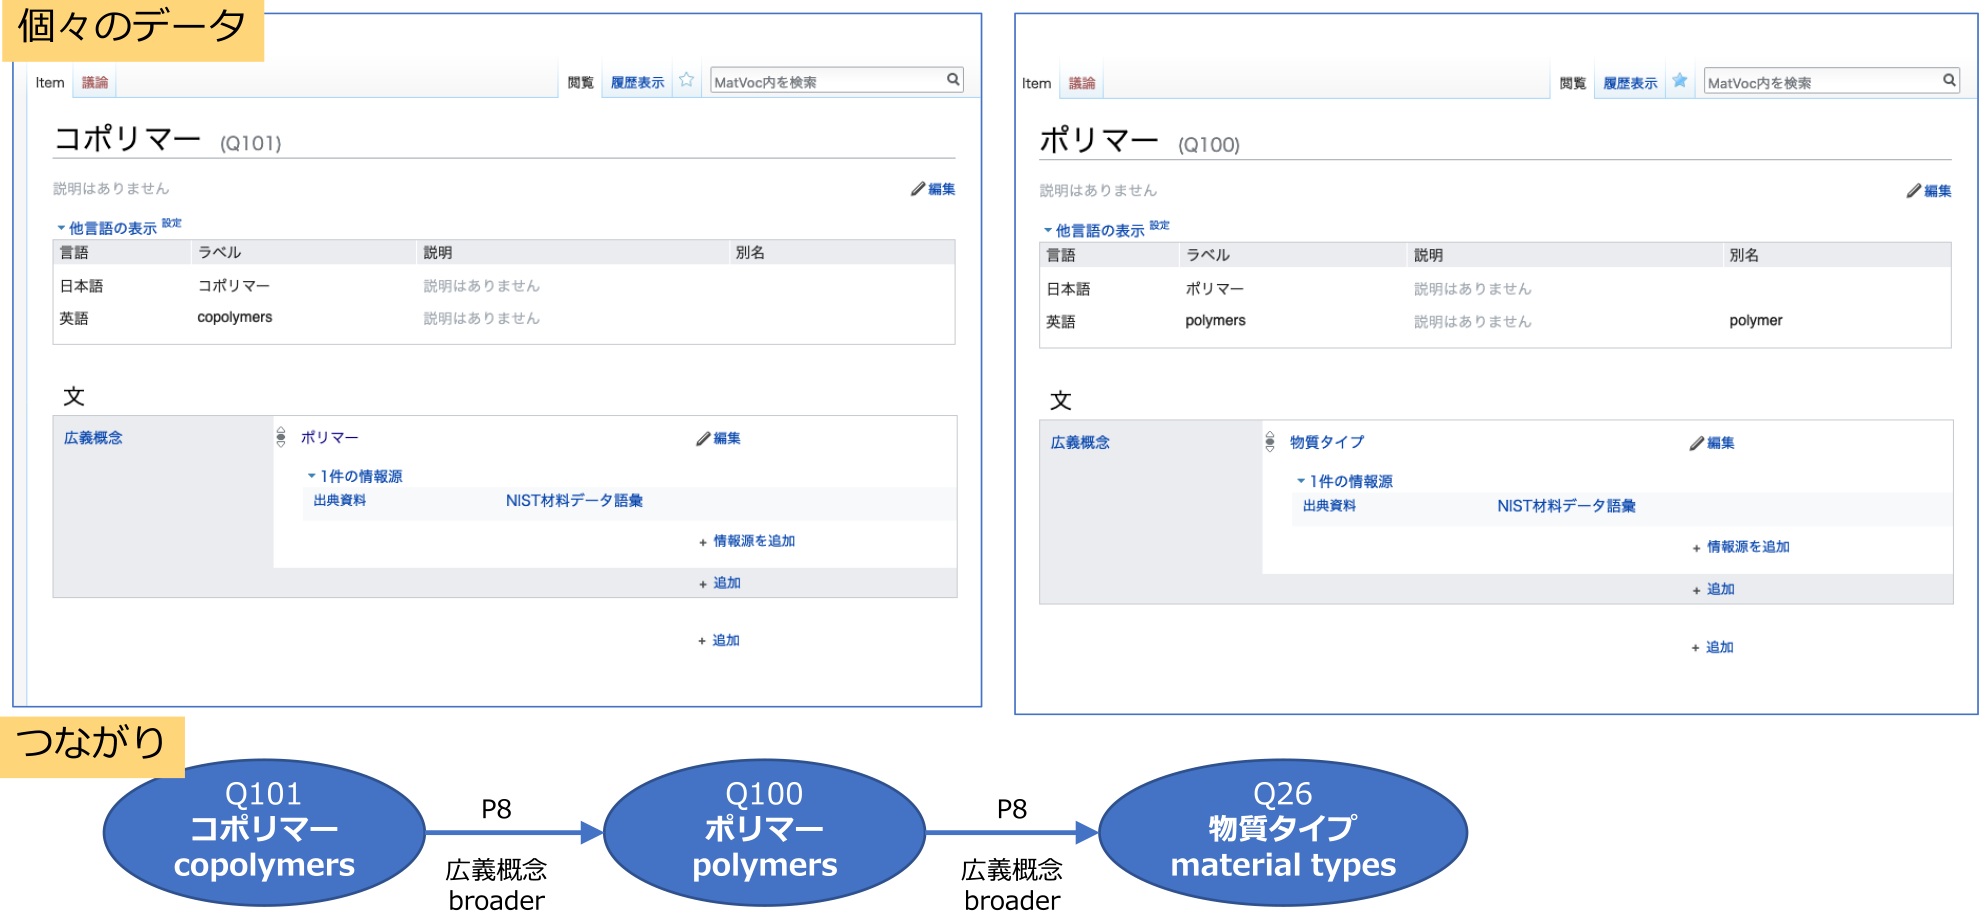 Wikibaseを基盤として構築する材料辞書MatVocで扱う語彙の例　Example of terms in MatVoc structured with Wikibase framework.